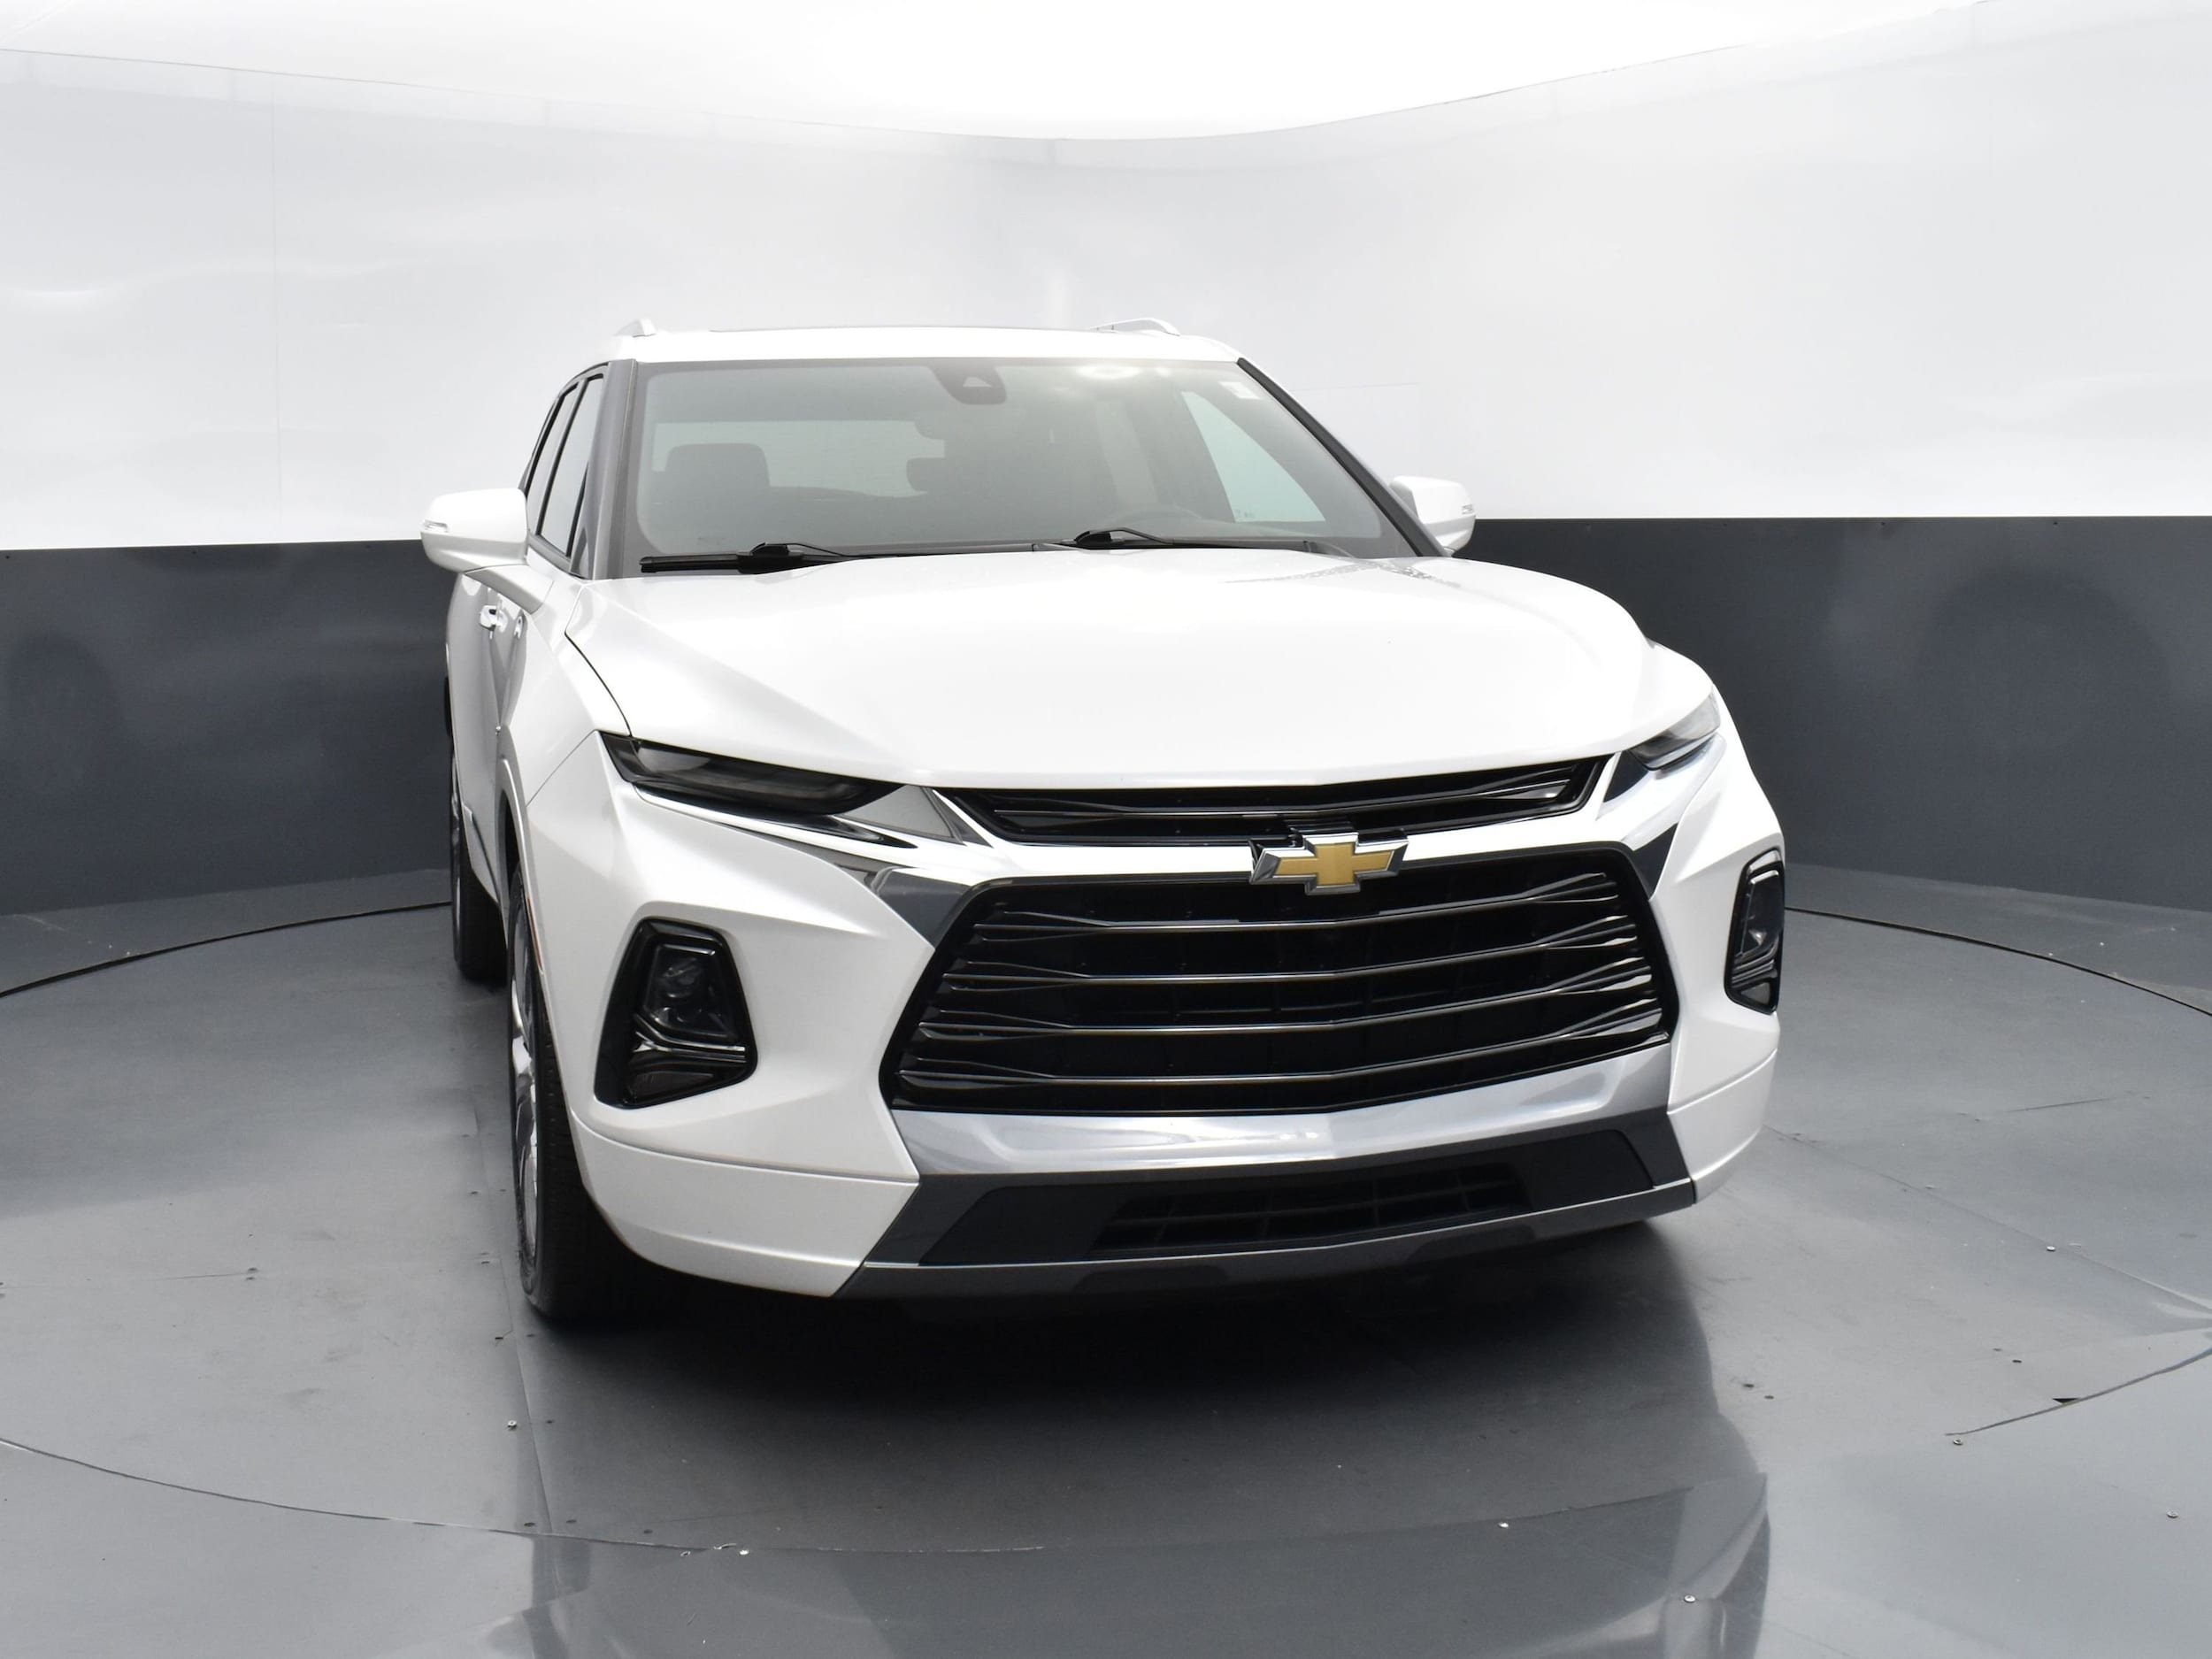 Used 2020 Chevrolet Blazer Premier with VIN 3GNKBFRS0LS558641 for sale in Cary, NC